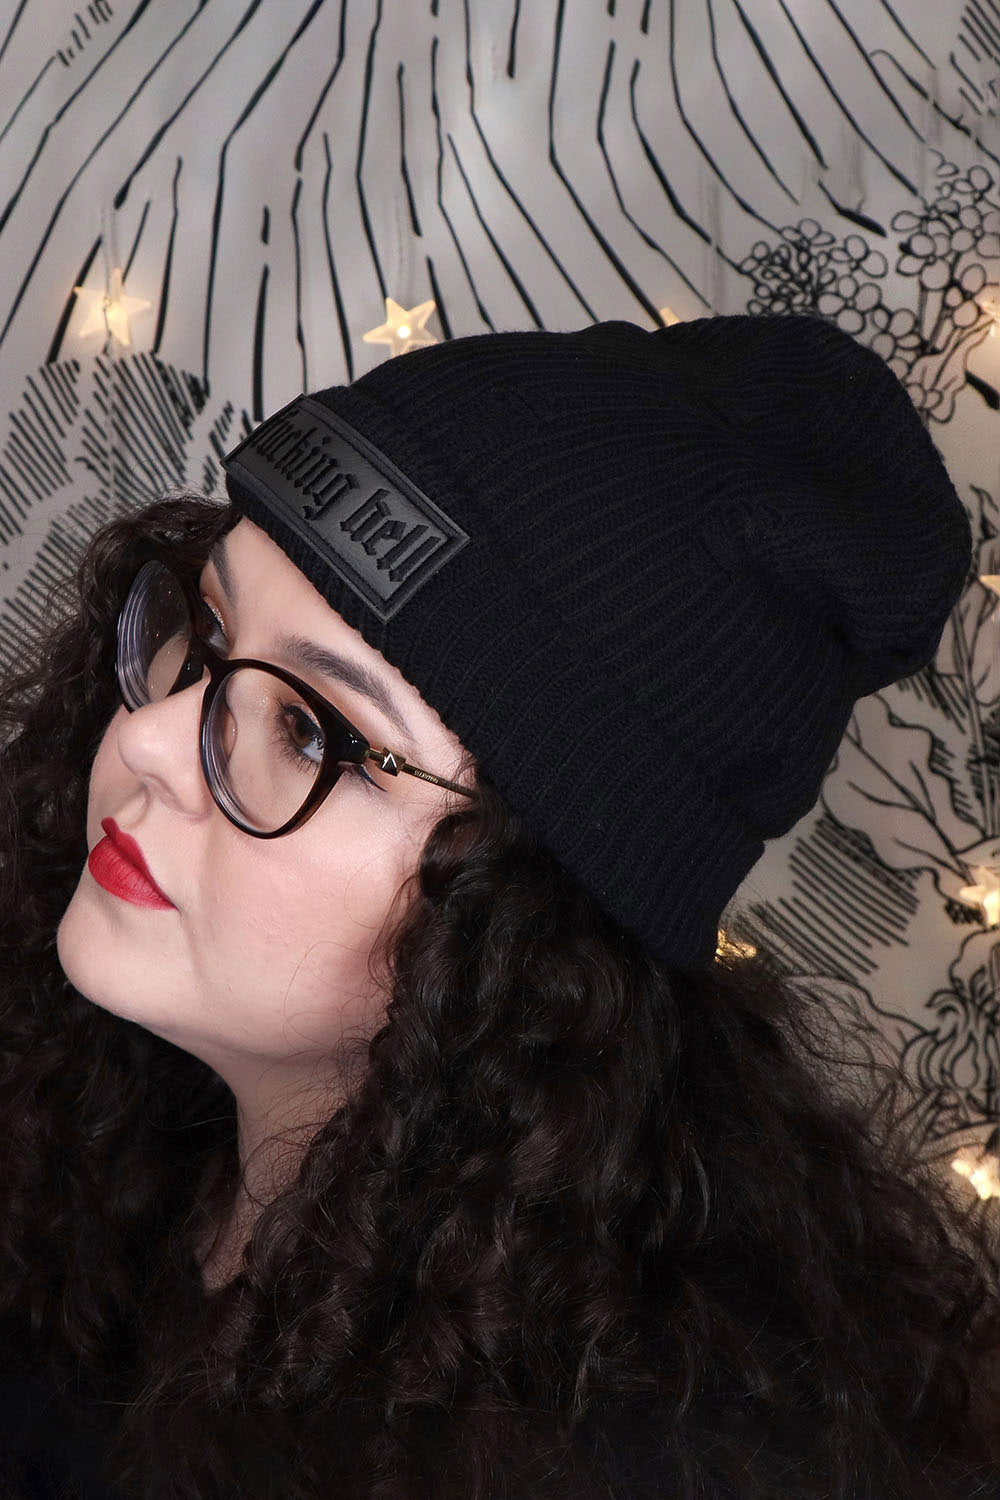 rocker beanie hat embroidered with swear word patch